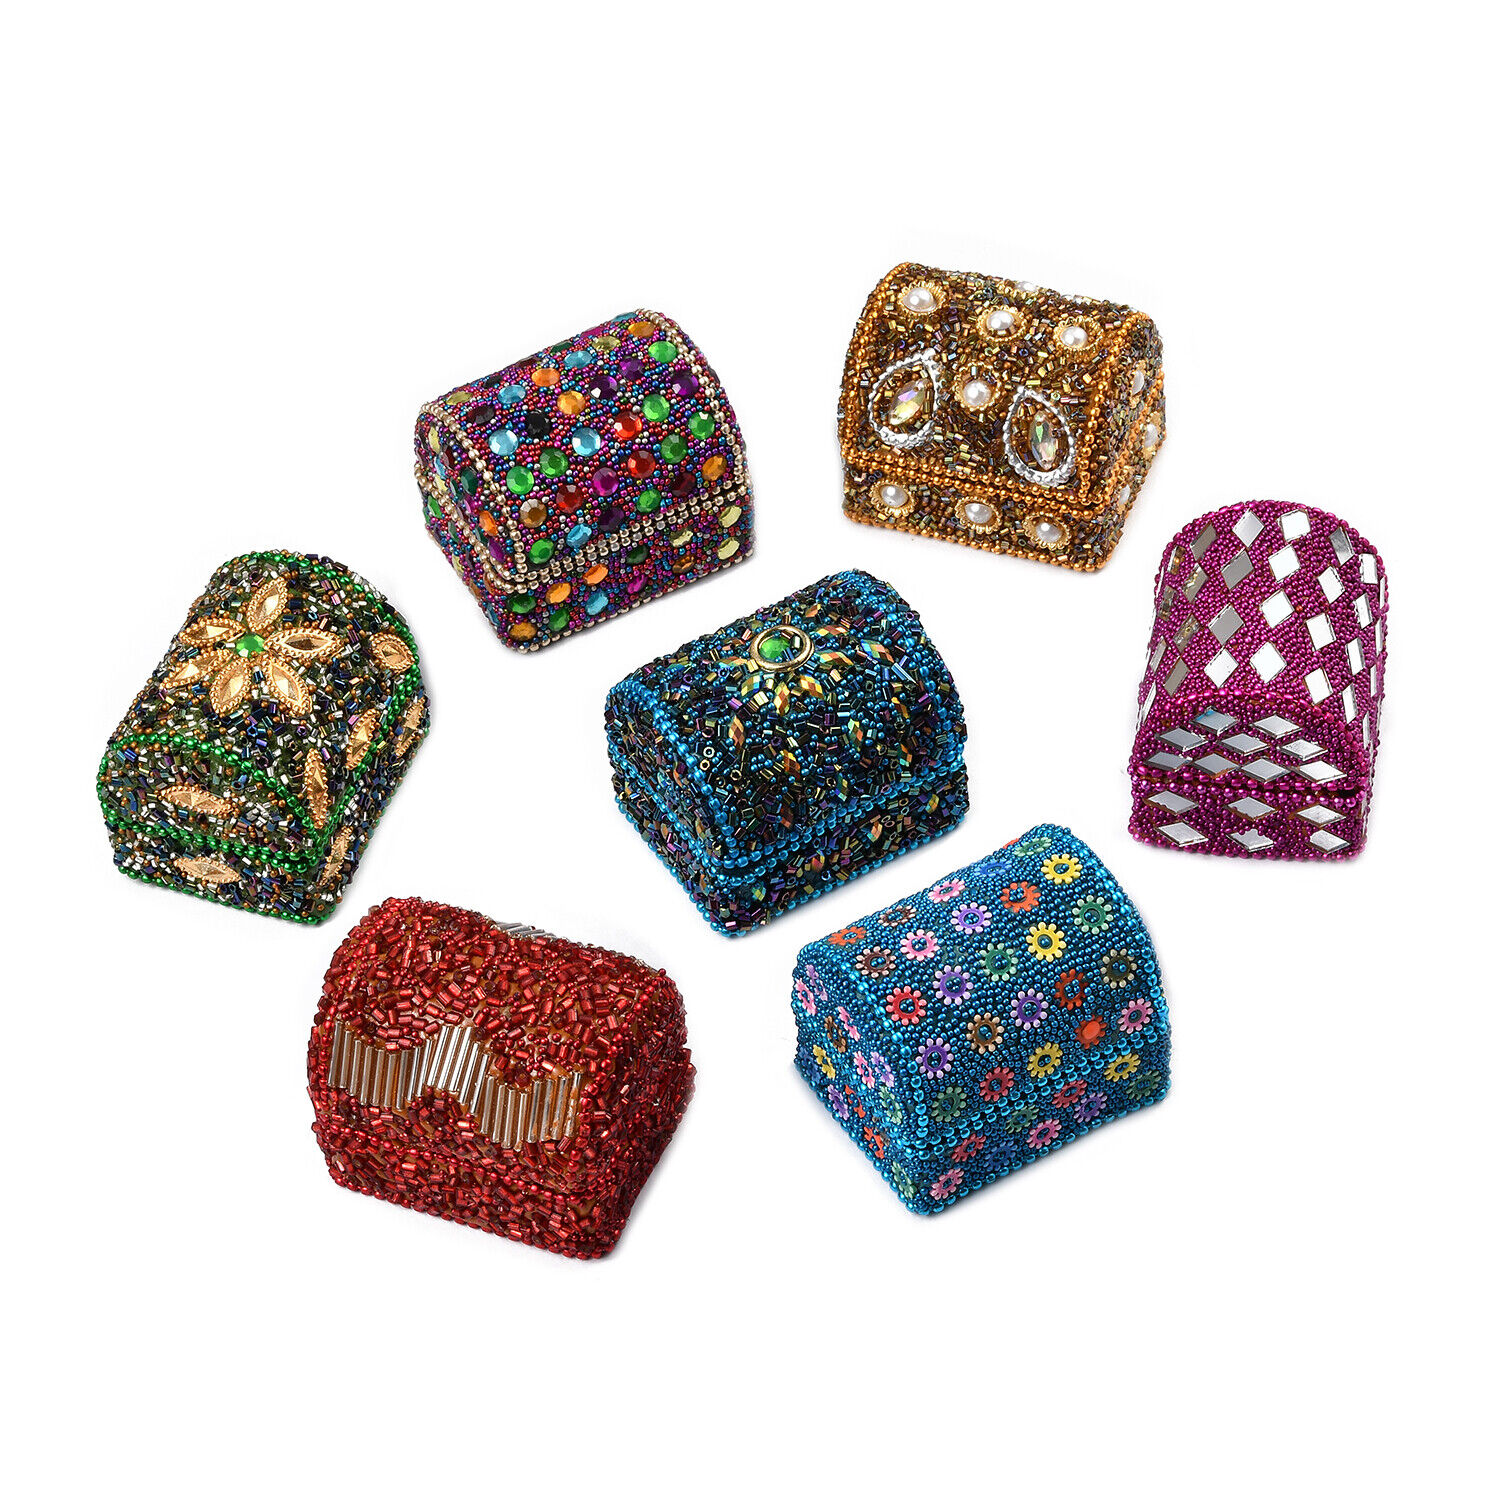 Jewelry Organizer Box Handcrafted Set of 7 Multi Color Wooden Beaded Chest